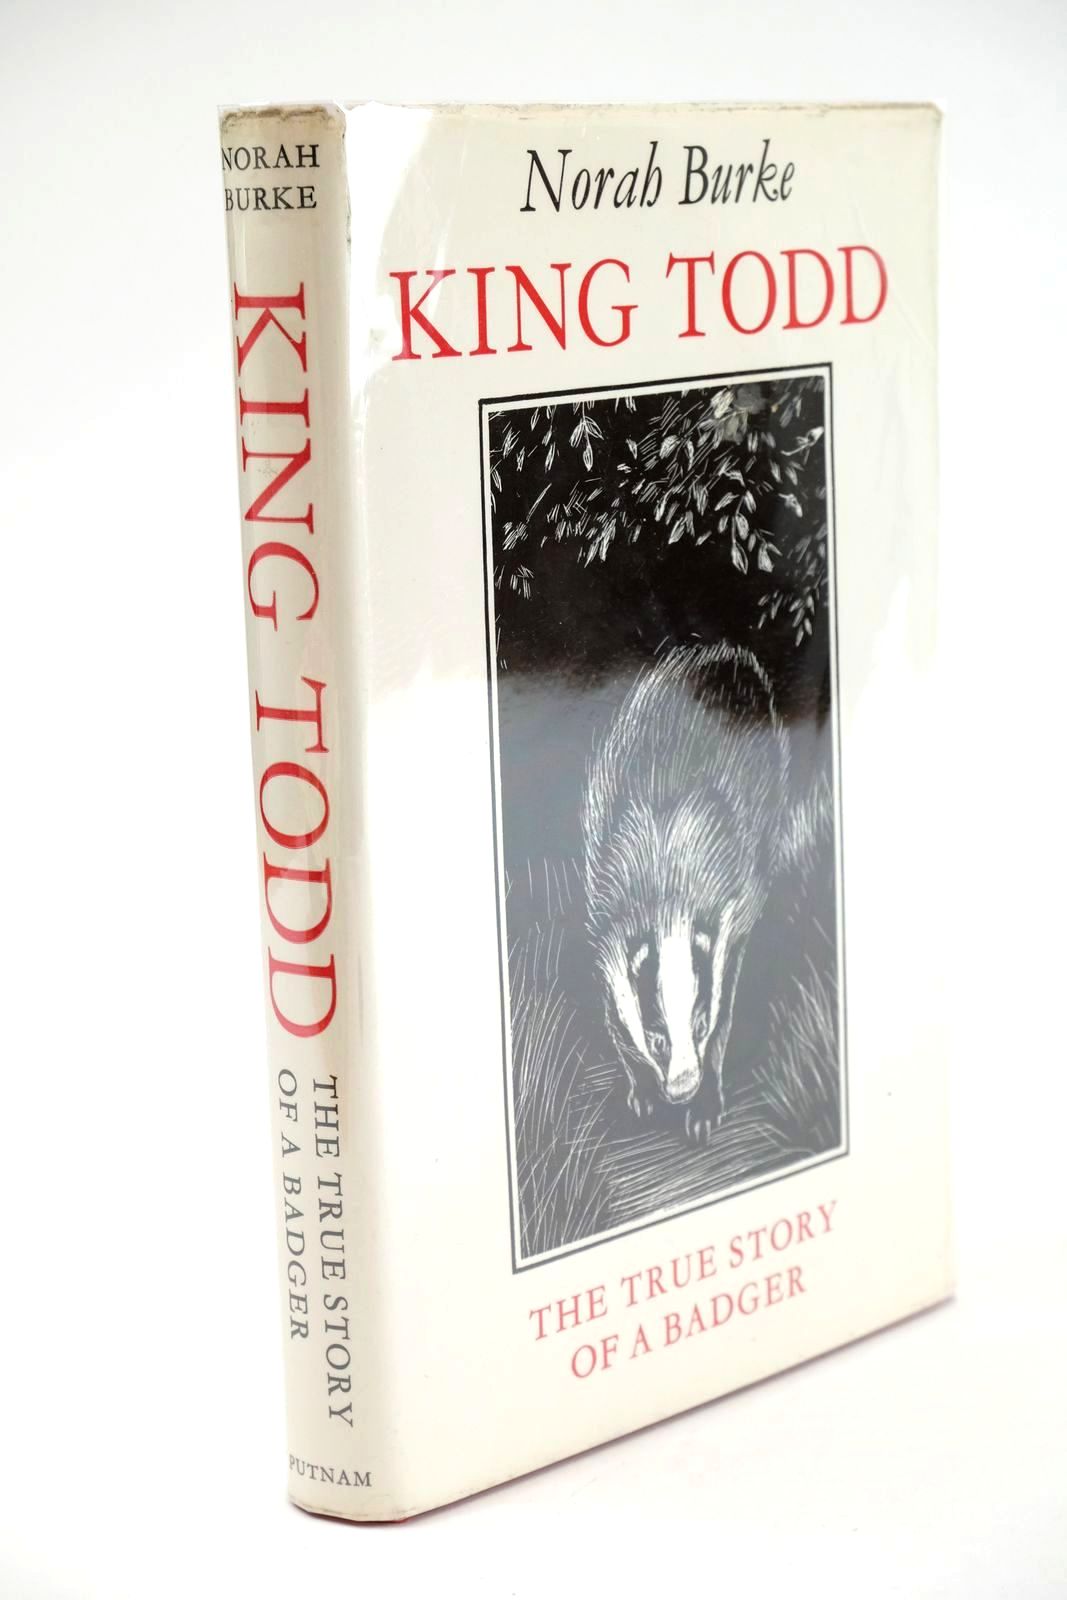 Photo of KING TODD written by Burke, Norah illustrated by BB, published by Putnam &amp; Co. Ltd. (STOCK CODE: 1324633)  for sale by Stella & Rose's Books